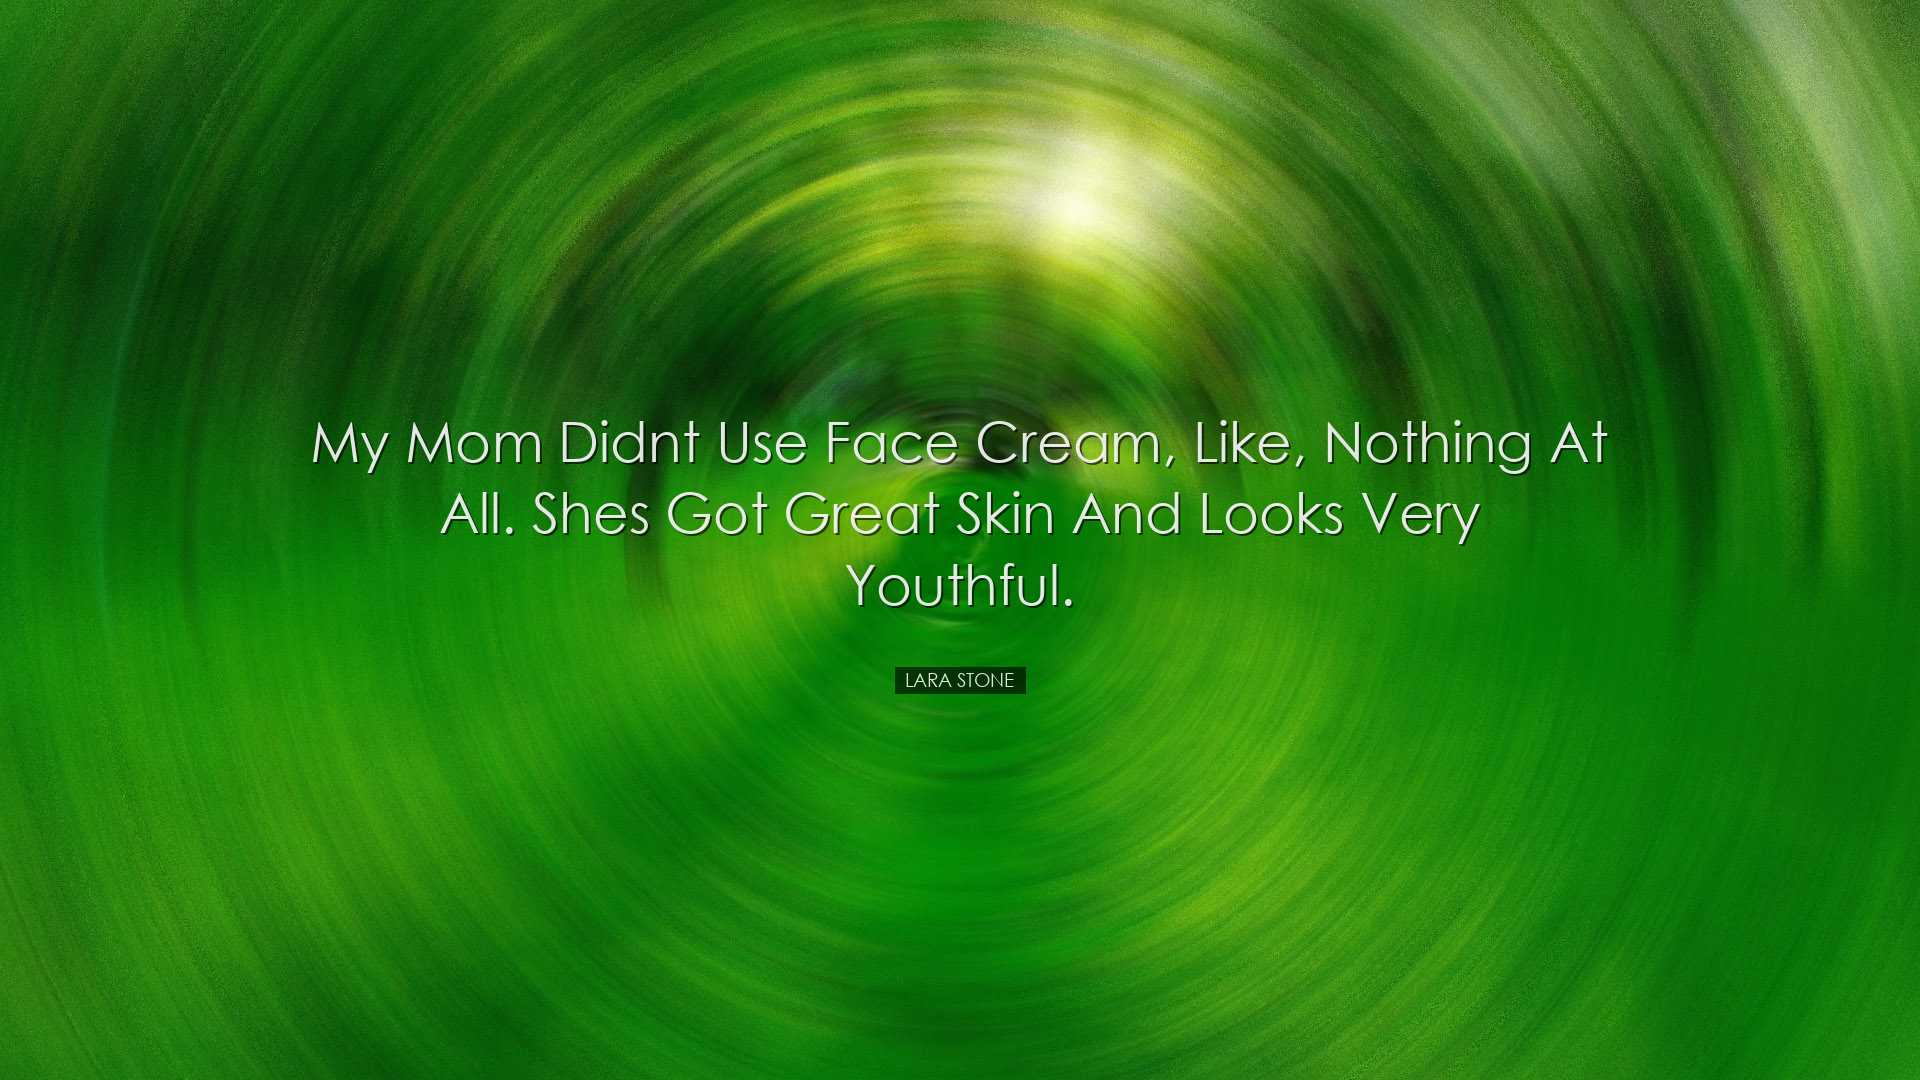 My mom didnt use face cream, like, nothing at all. Shes got great